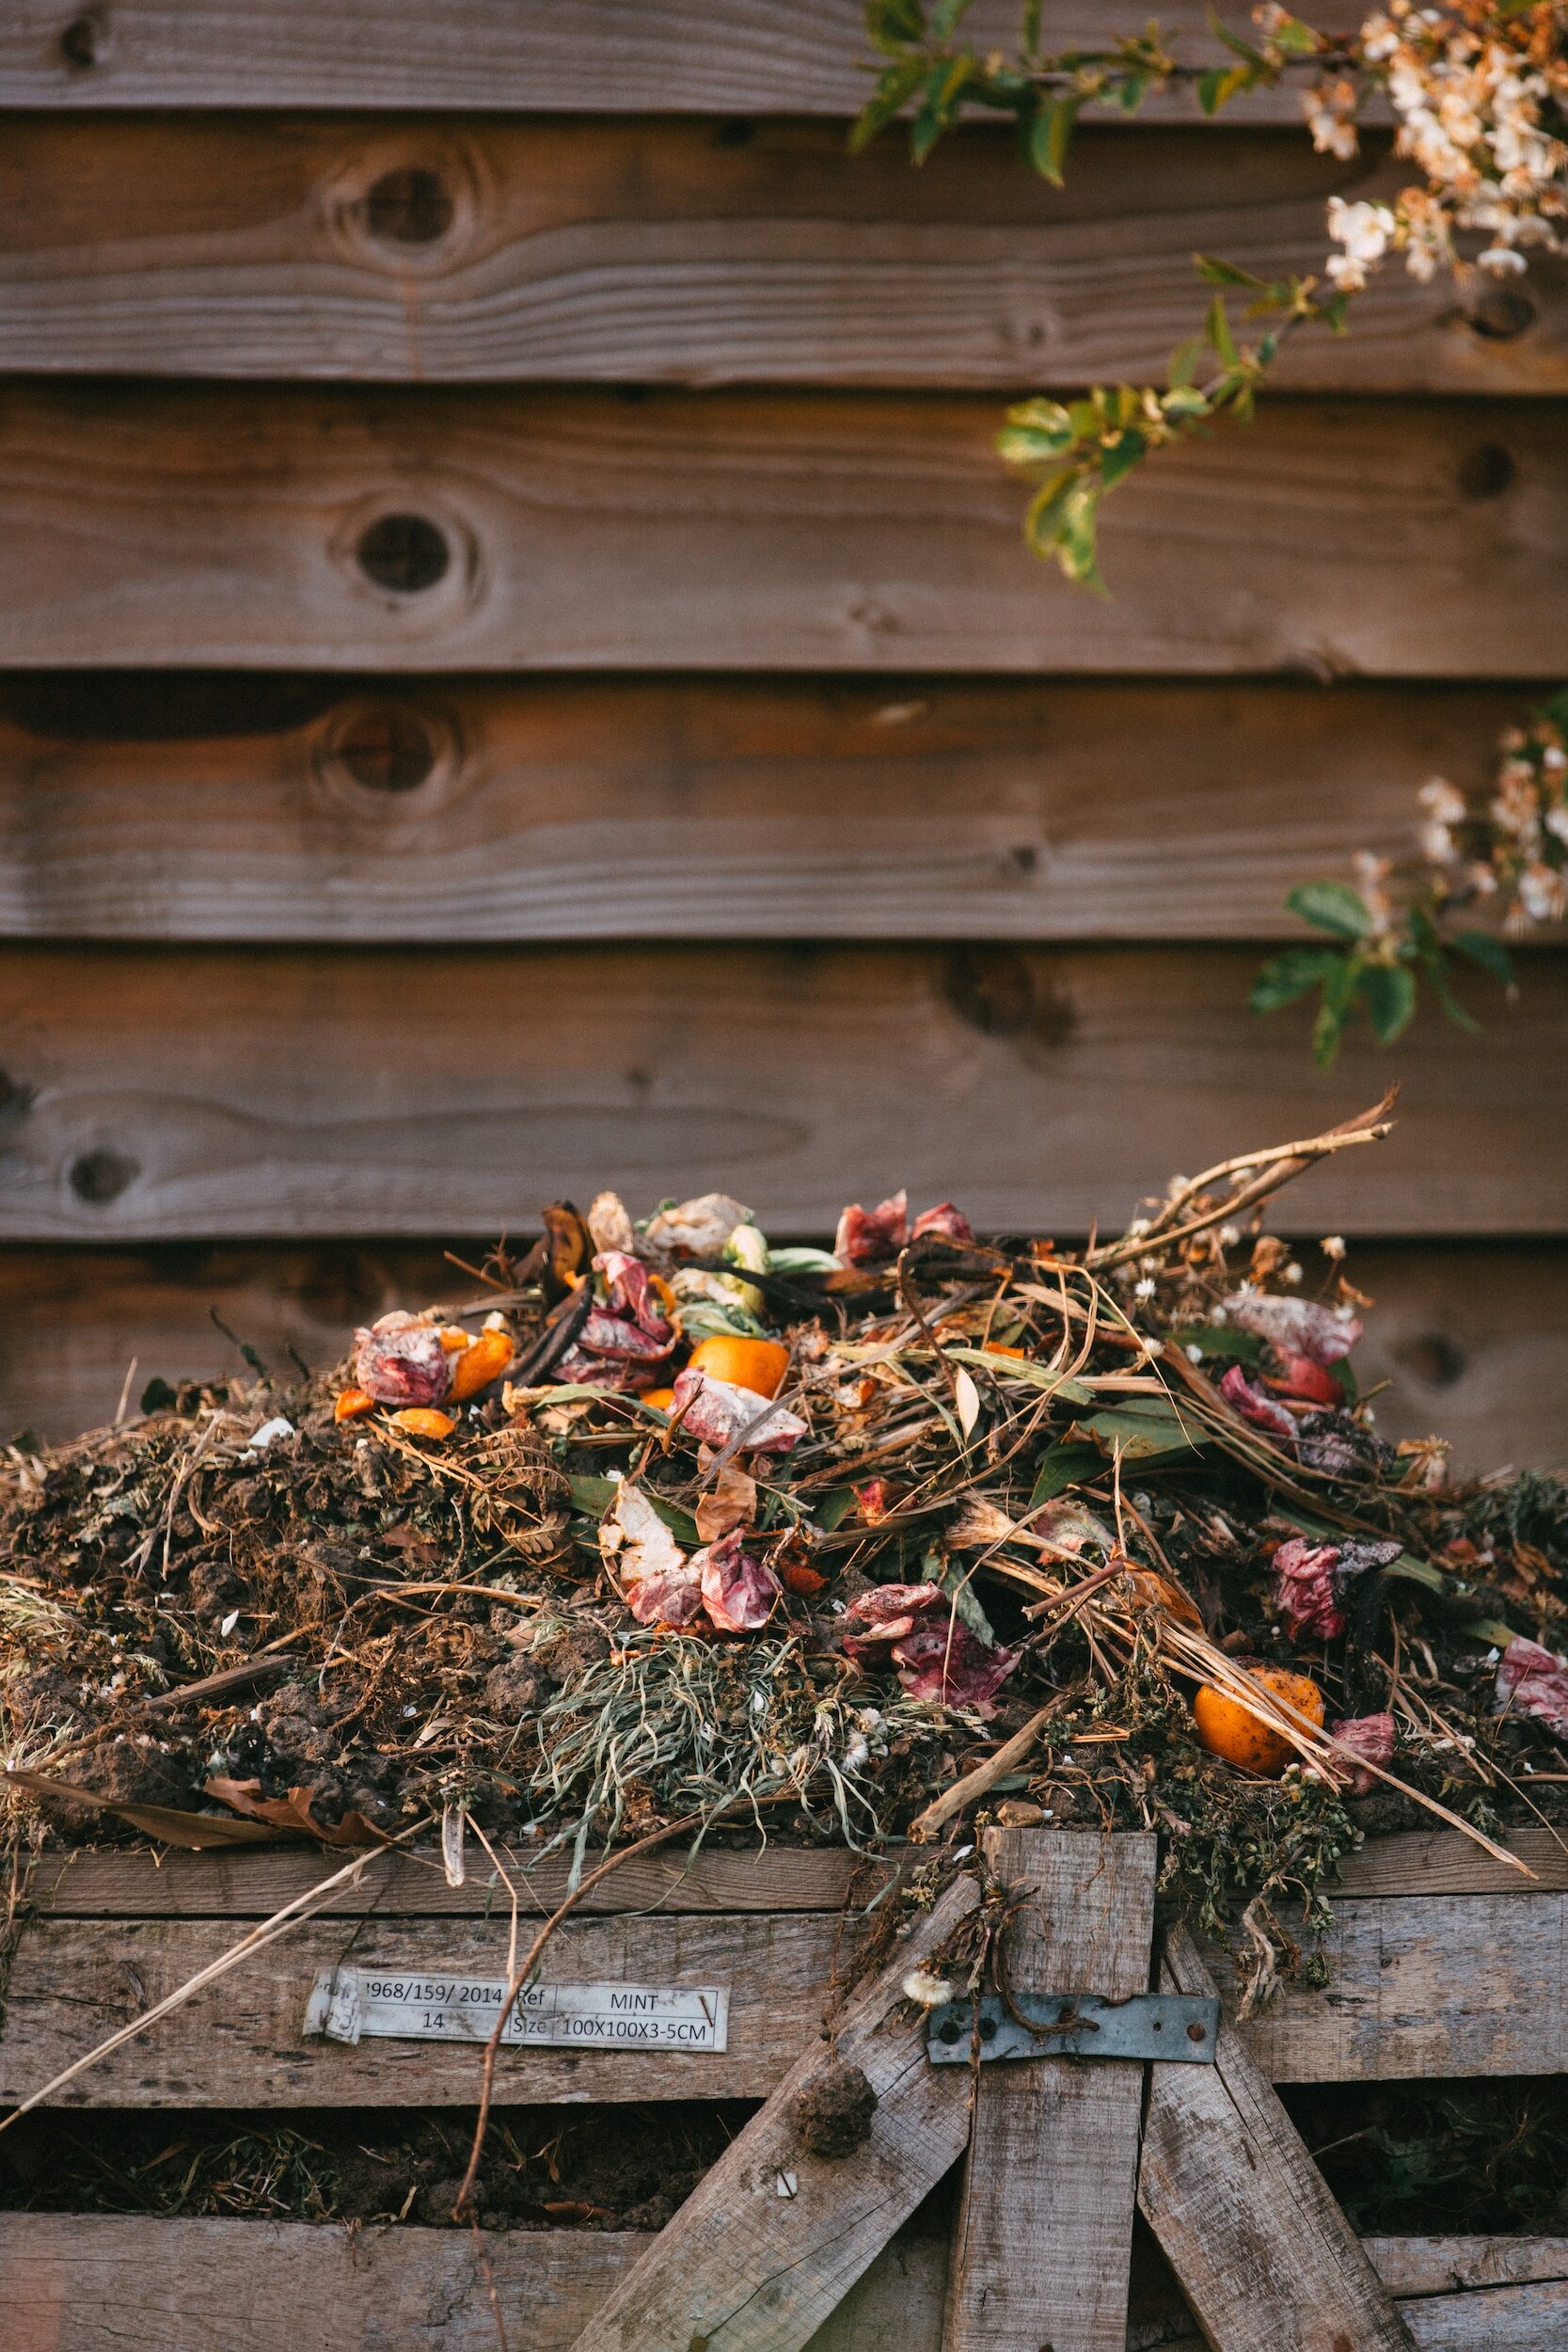 Nature's Nutrient Booster: Composting For a Flourishing Garden